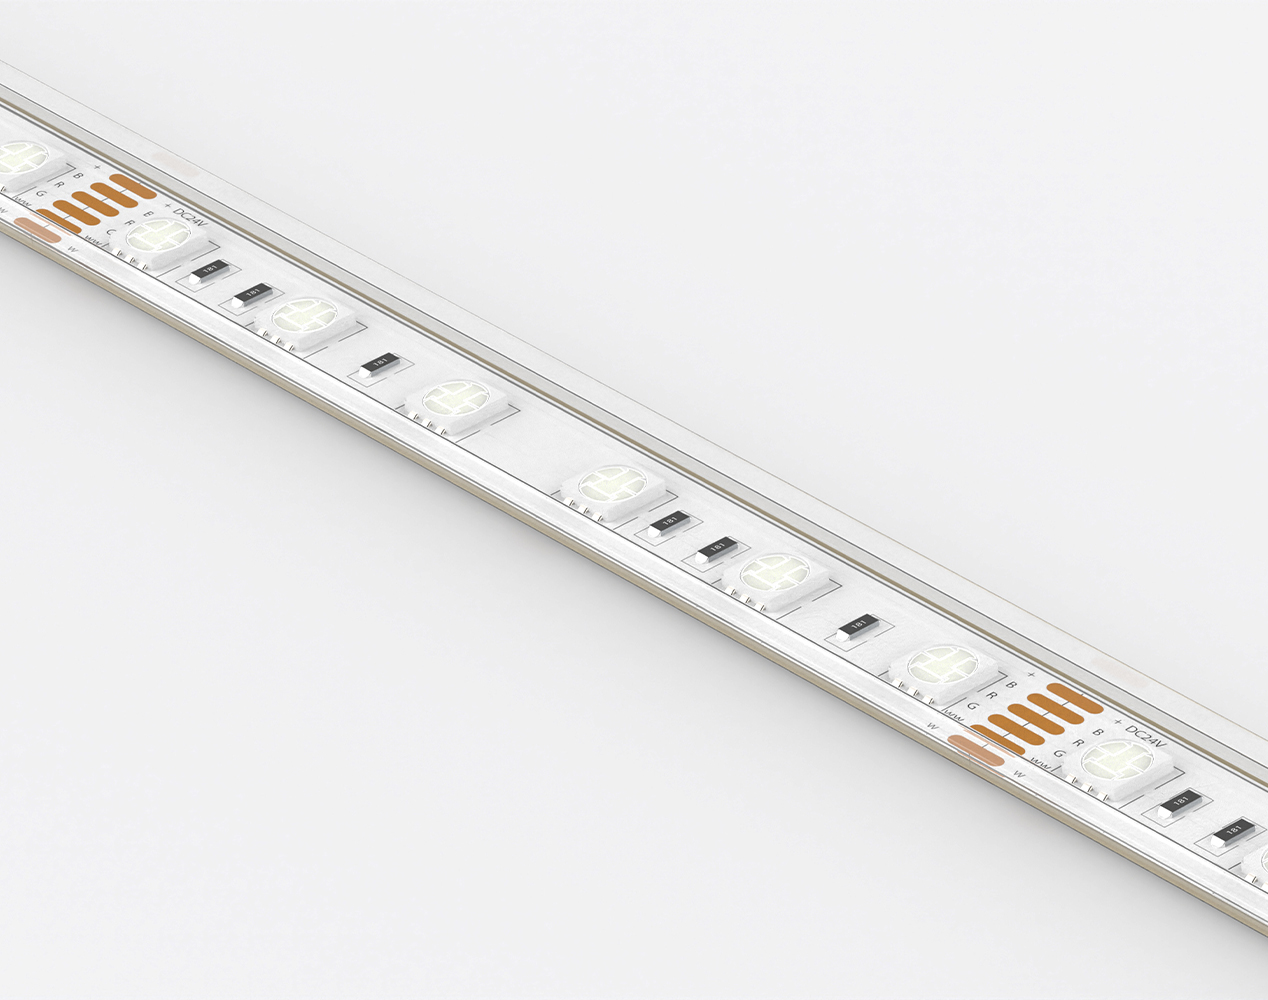 Digital RGB LED Weatherproof Strip 60 LED - (1m) with 5 Projects - DFRobot